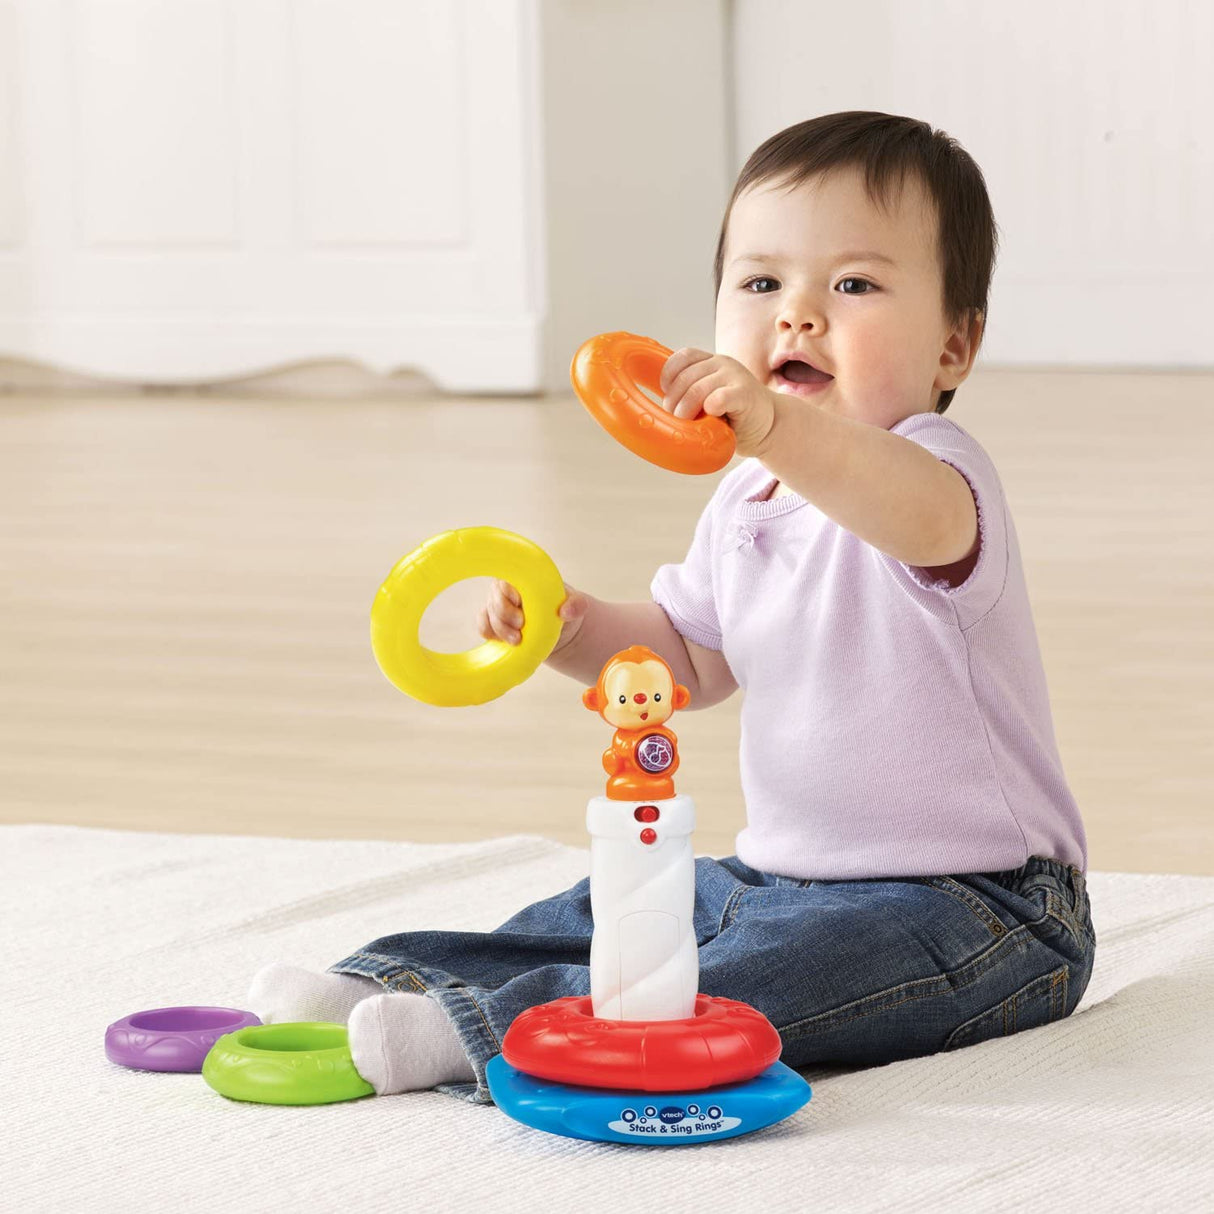 vtech STACK & DISCOVER RINGS